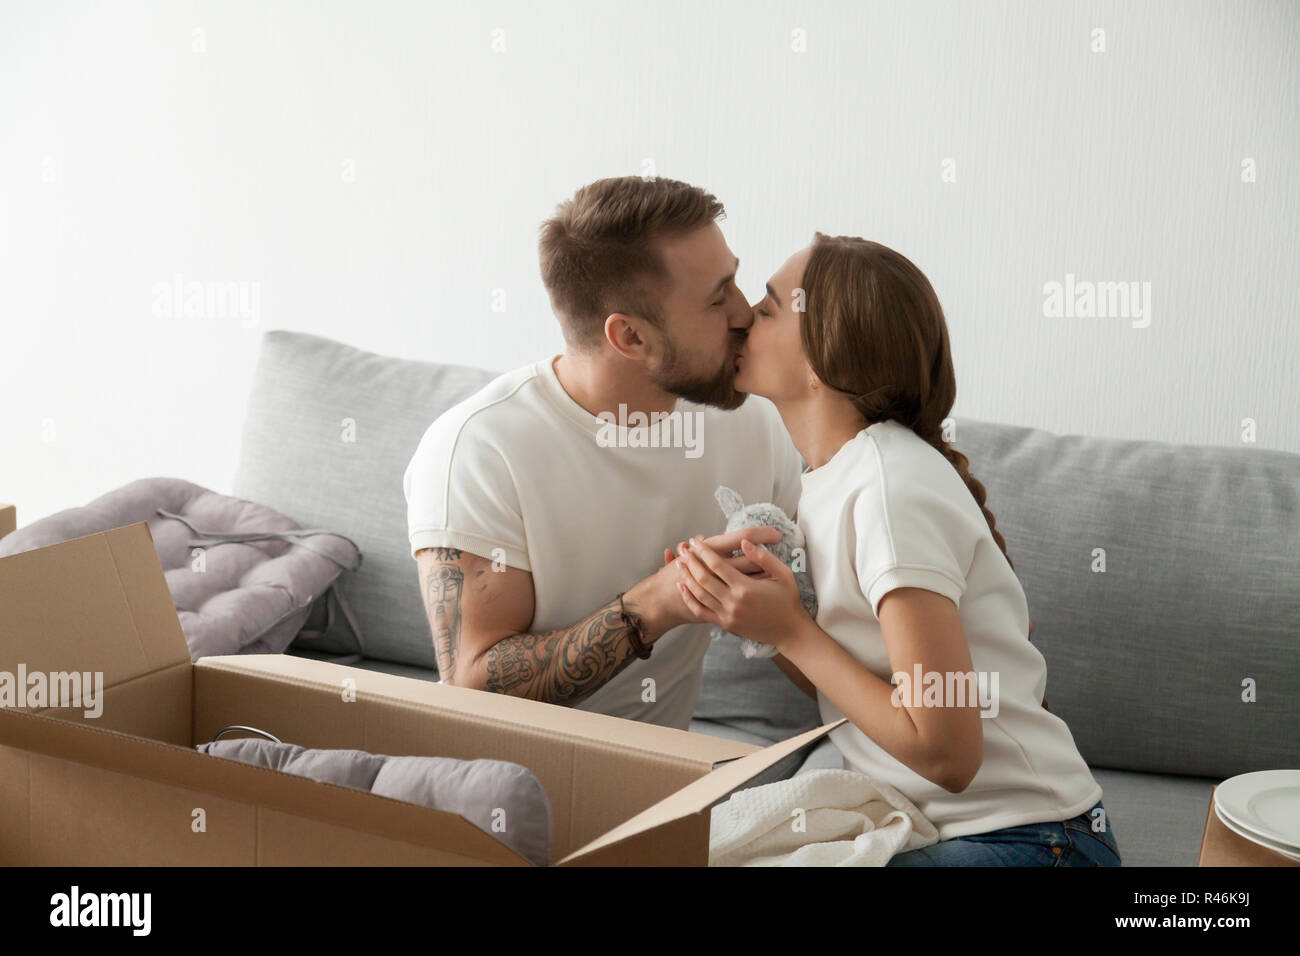 Young man and woman kissing sitting on sofa in living room Banque D'Images